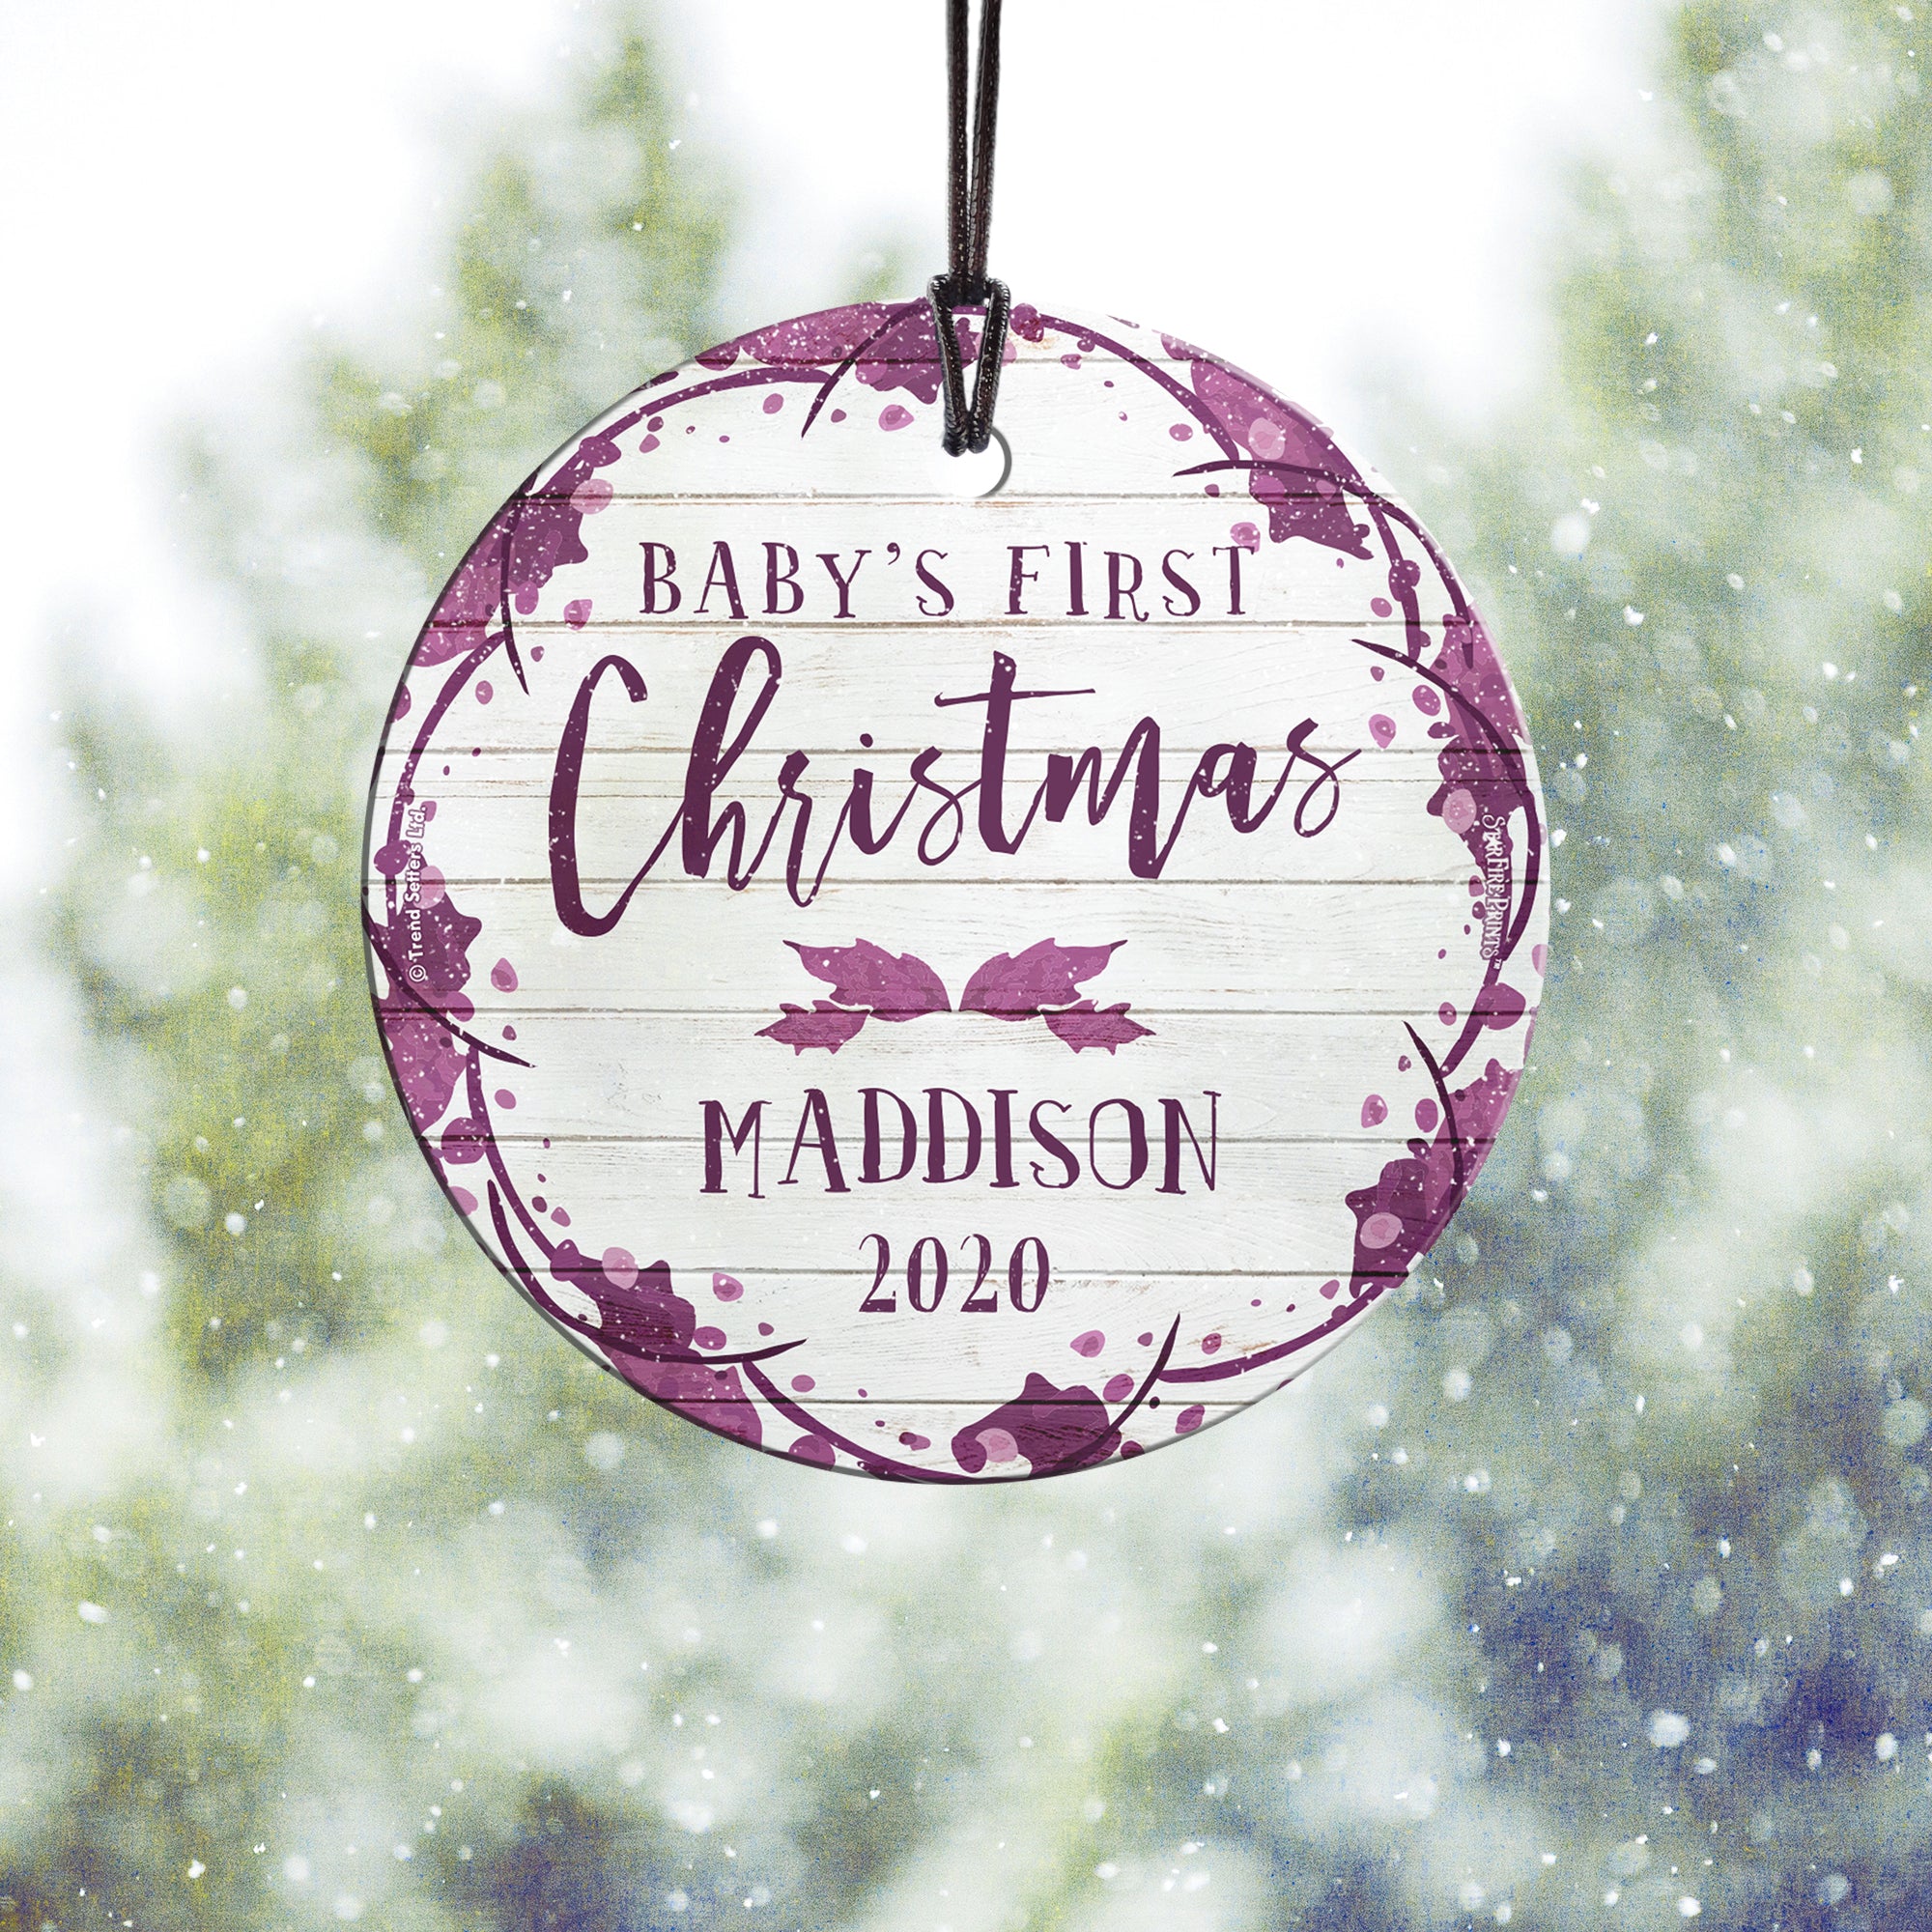 Baby's First Christmas (Purple and Shiplap - Personalized) StarFire Prints Hanging Glass Print SPCIR960